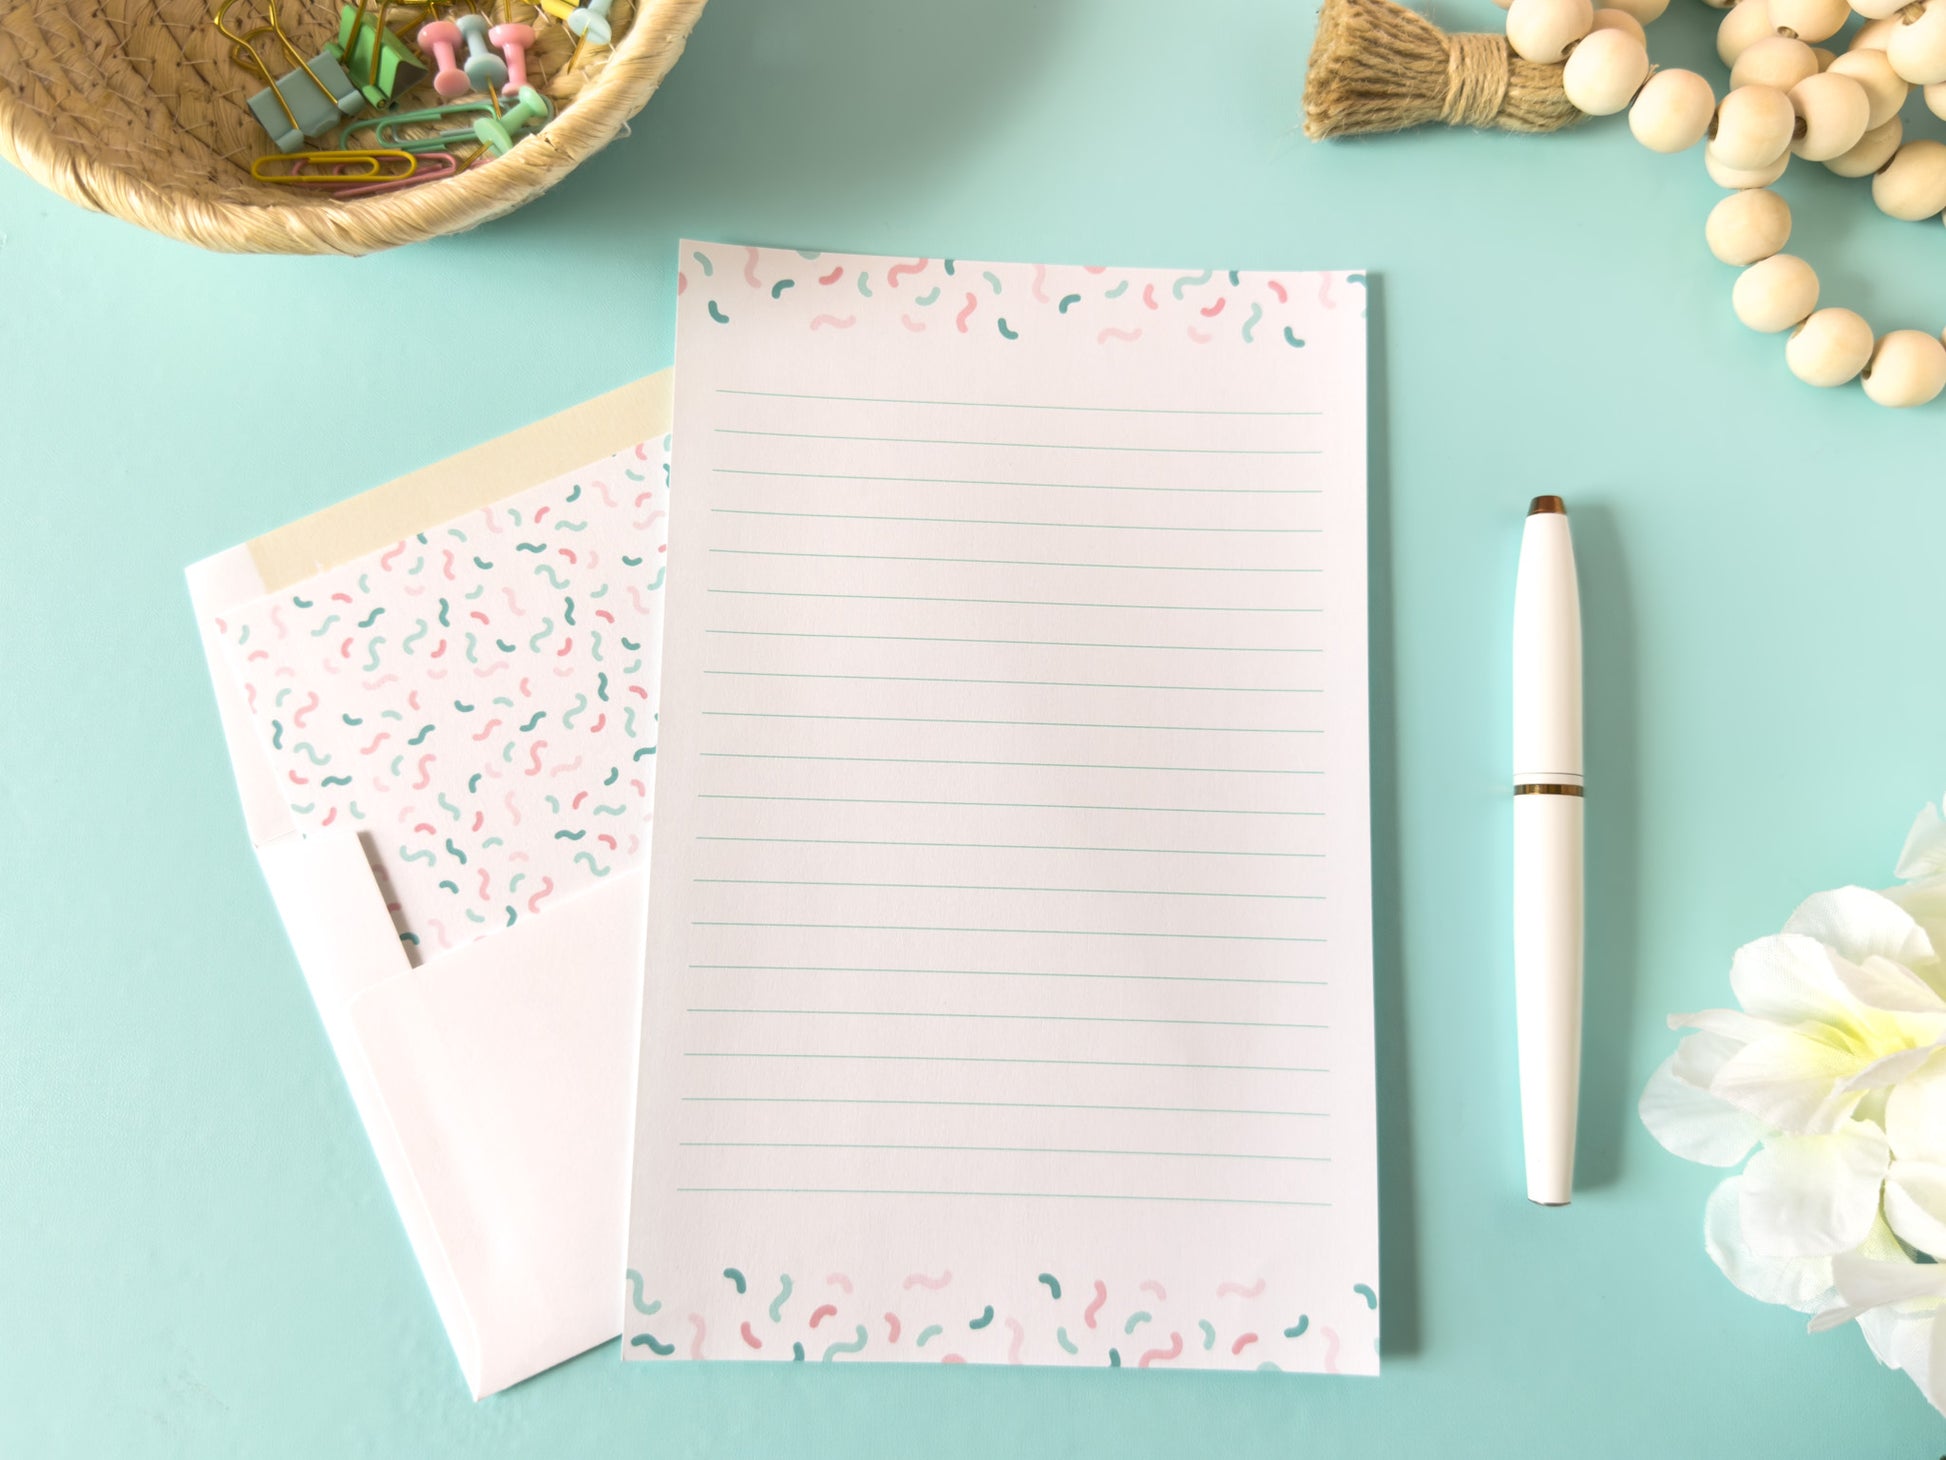 JW Letter Writing A4 Pad Stationery Paper Lined Gift Notepad